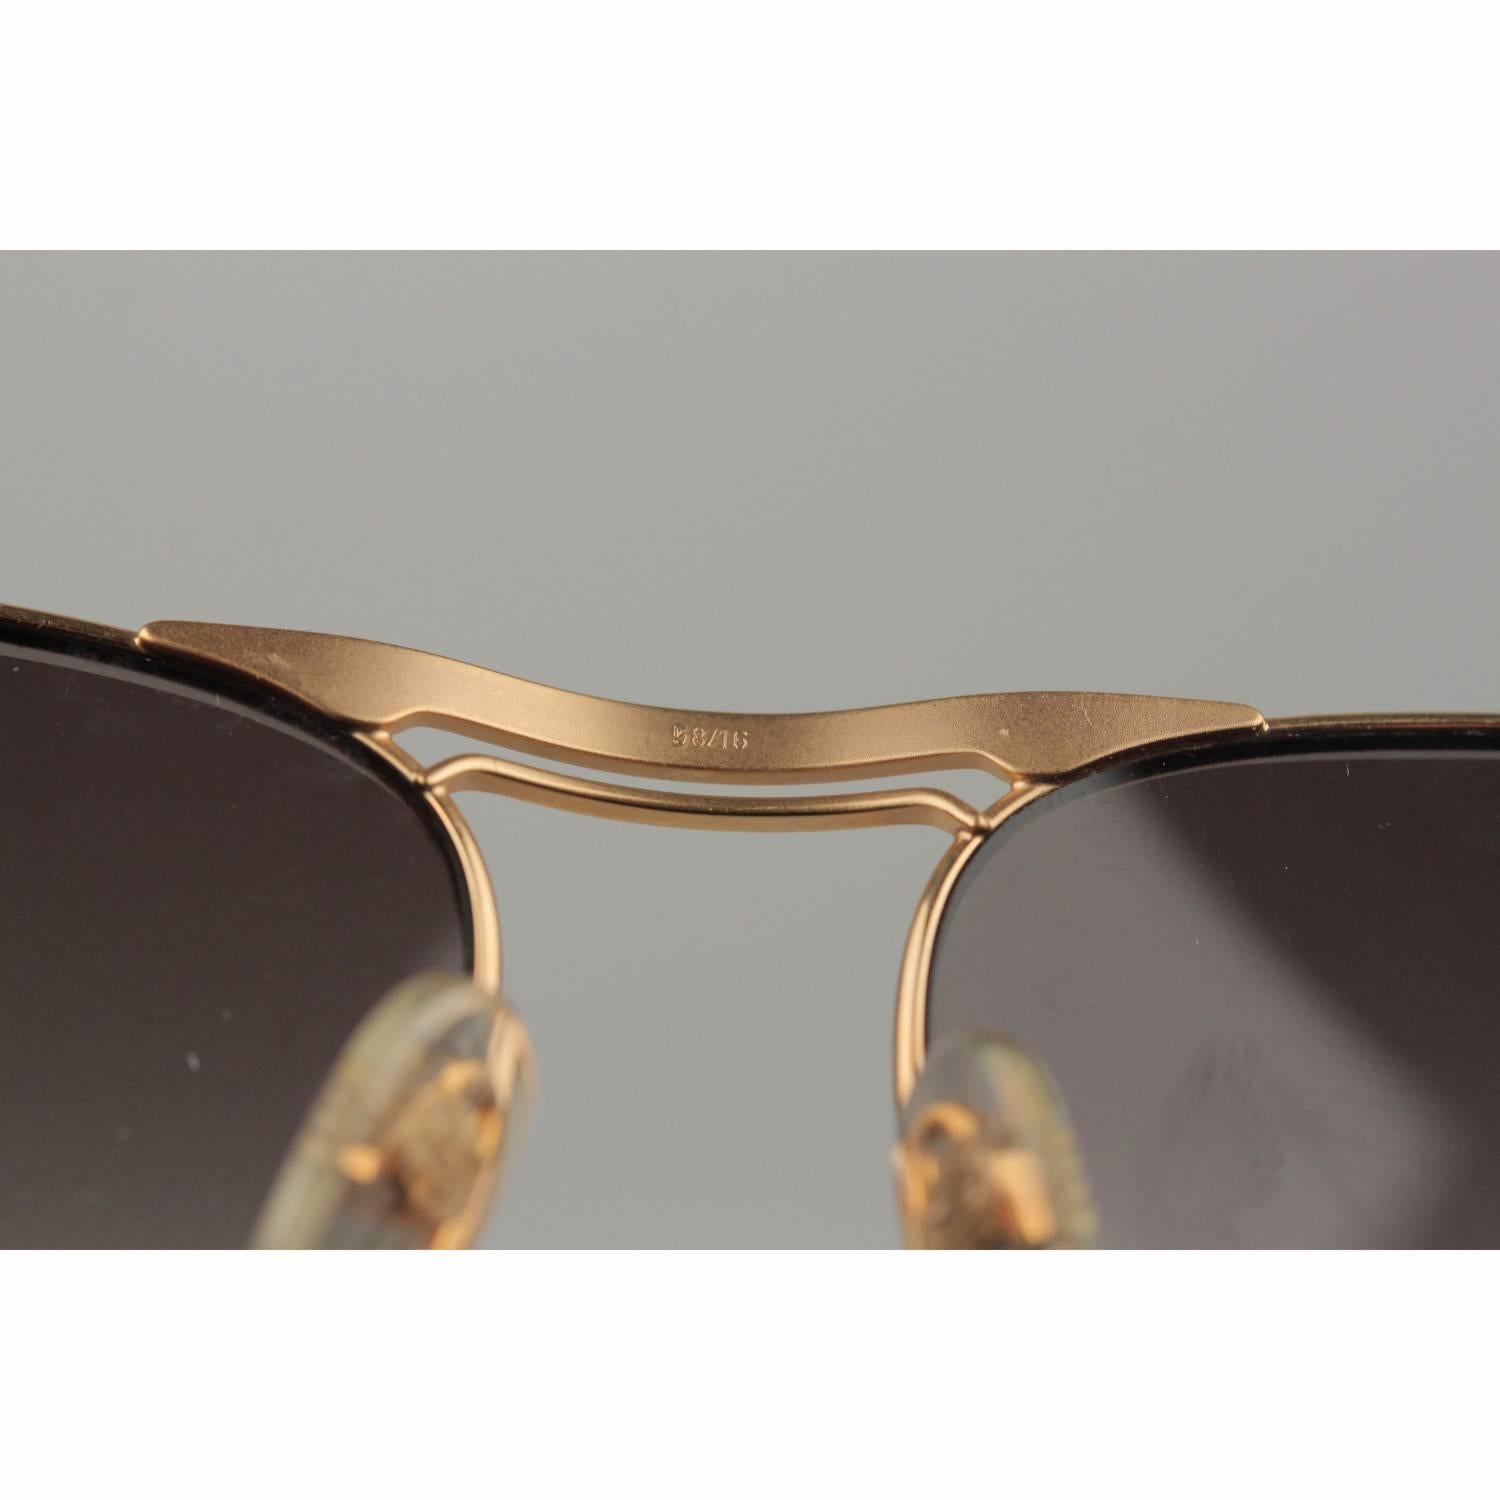 Women's or Men's SILHOUETTE Vintage Gold Metal Sunglasses M7019 58-16mm New Old Stock